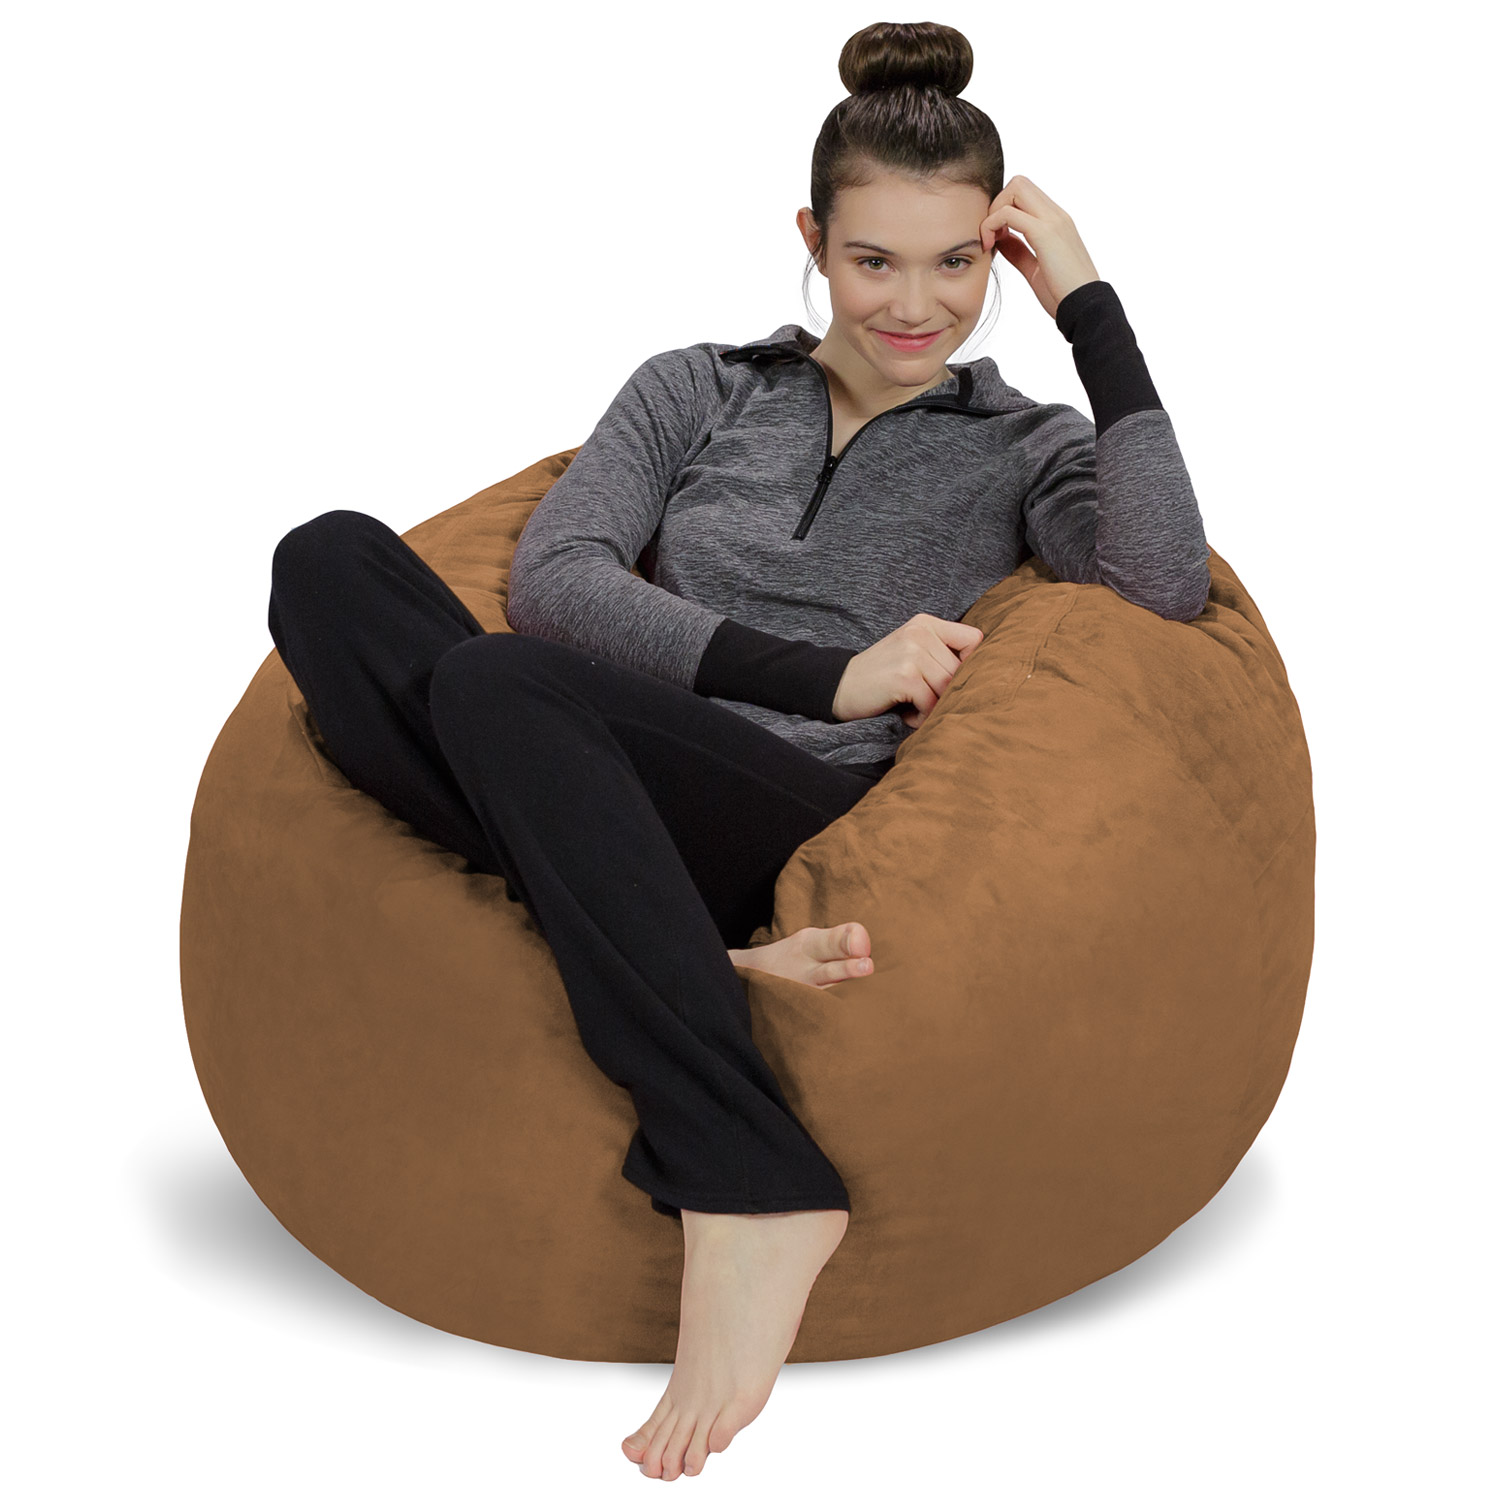 Sofa Sack Bean Bag Chair, Memory Foam Lounger with Microsuede Cover, Kids, 3 ft, Cocoa - image 1 of 5